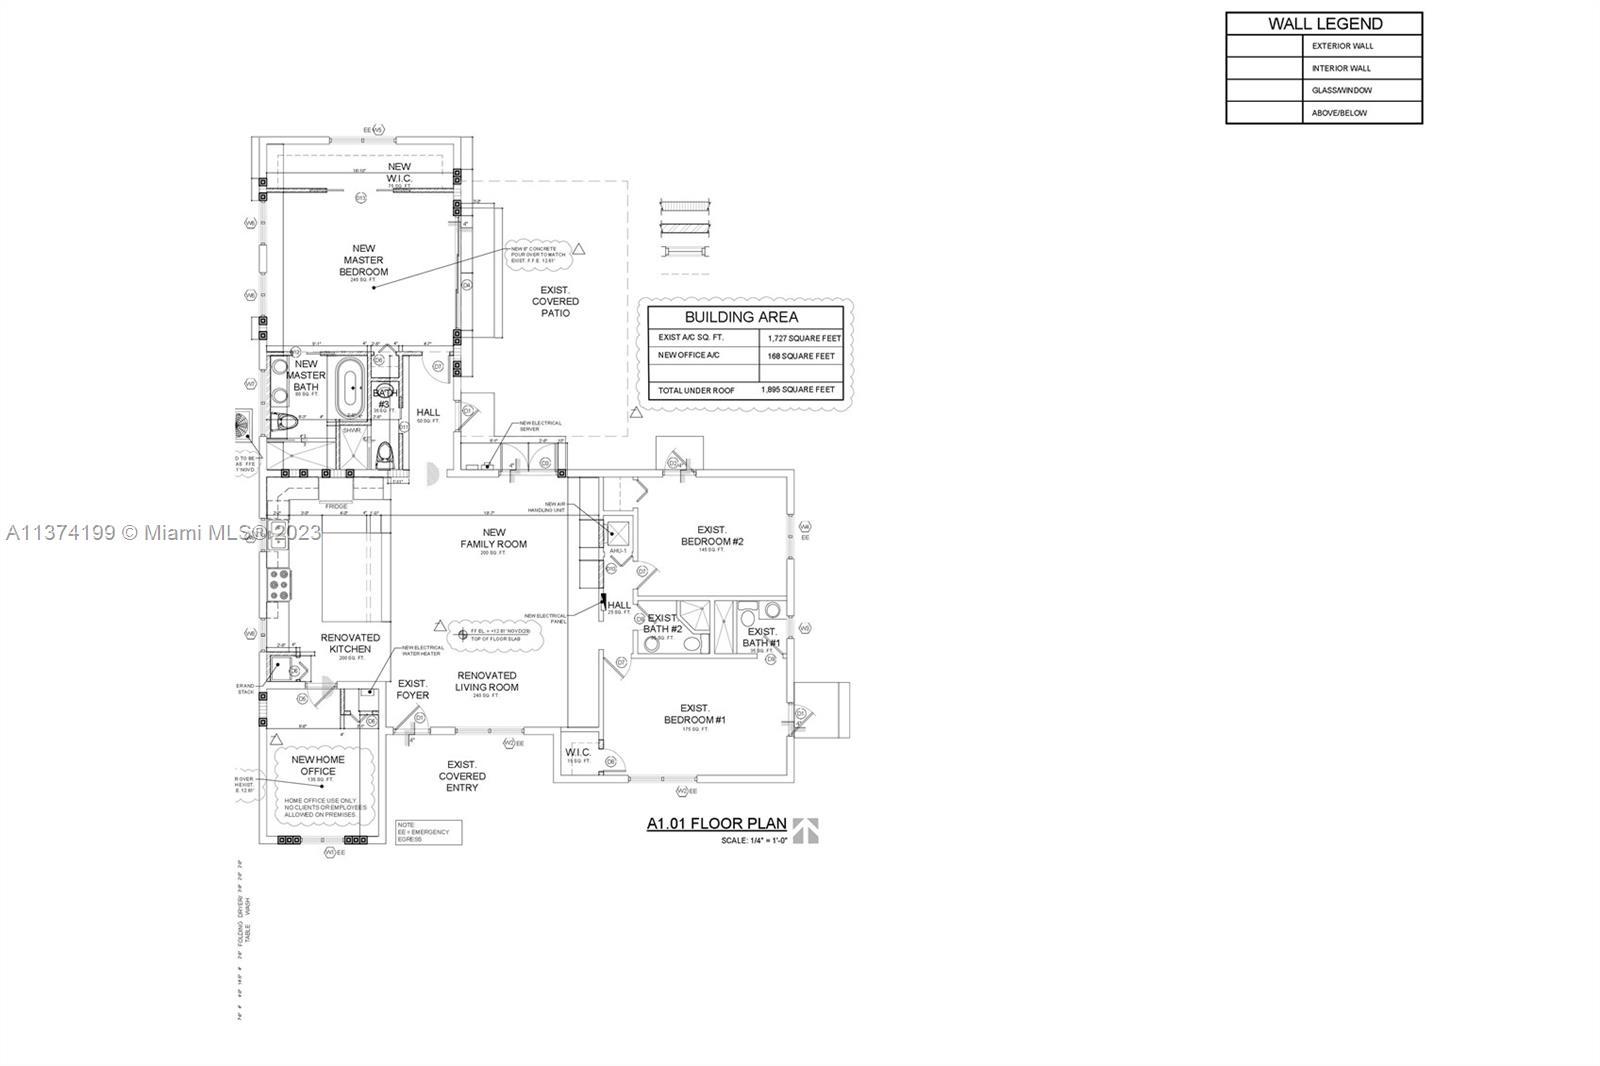 Floor plan for renovation. Permit approved by the City.